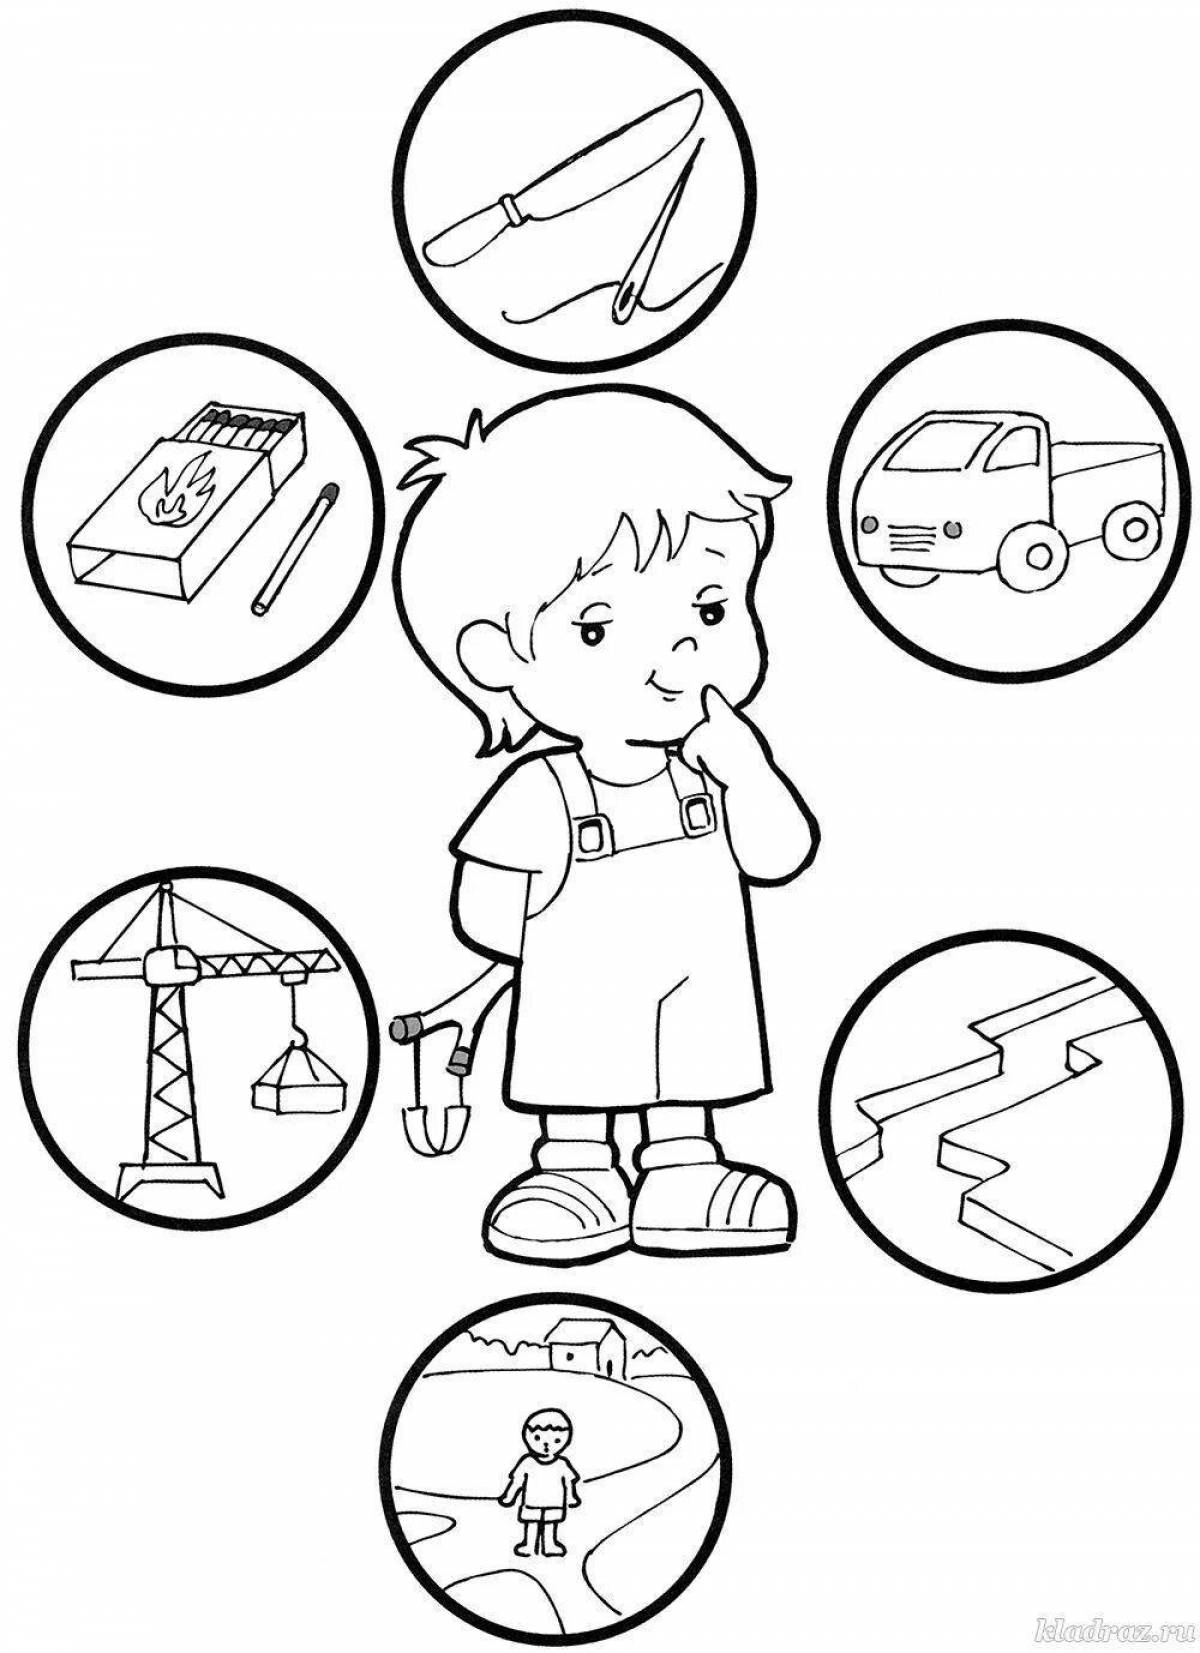 Child safety at home #7